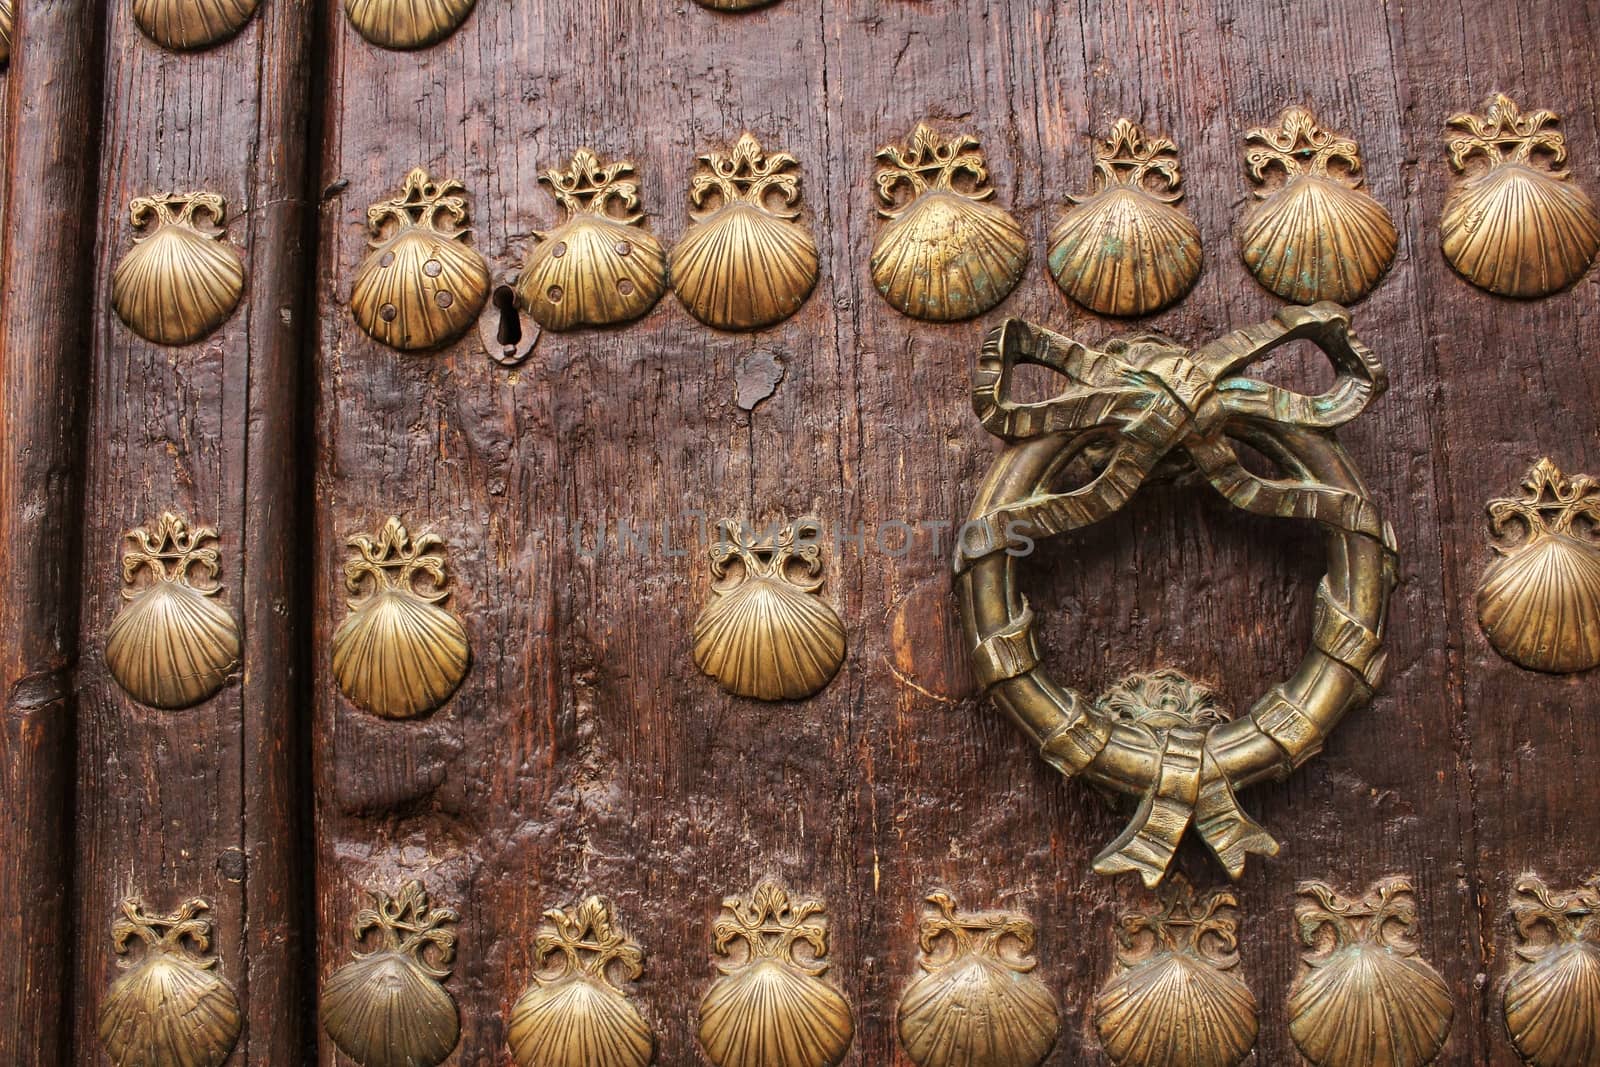 Old door with golden wrought iron details with figures of shells by soniabonet